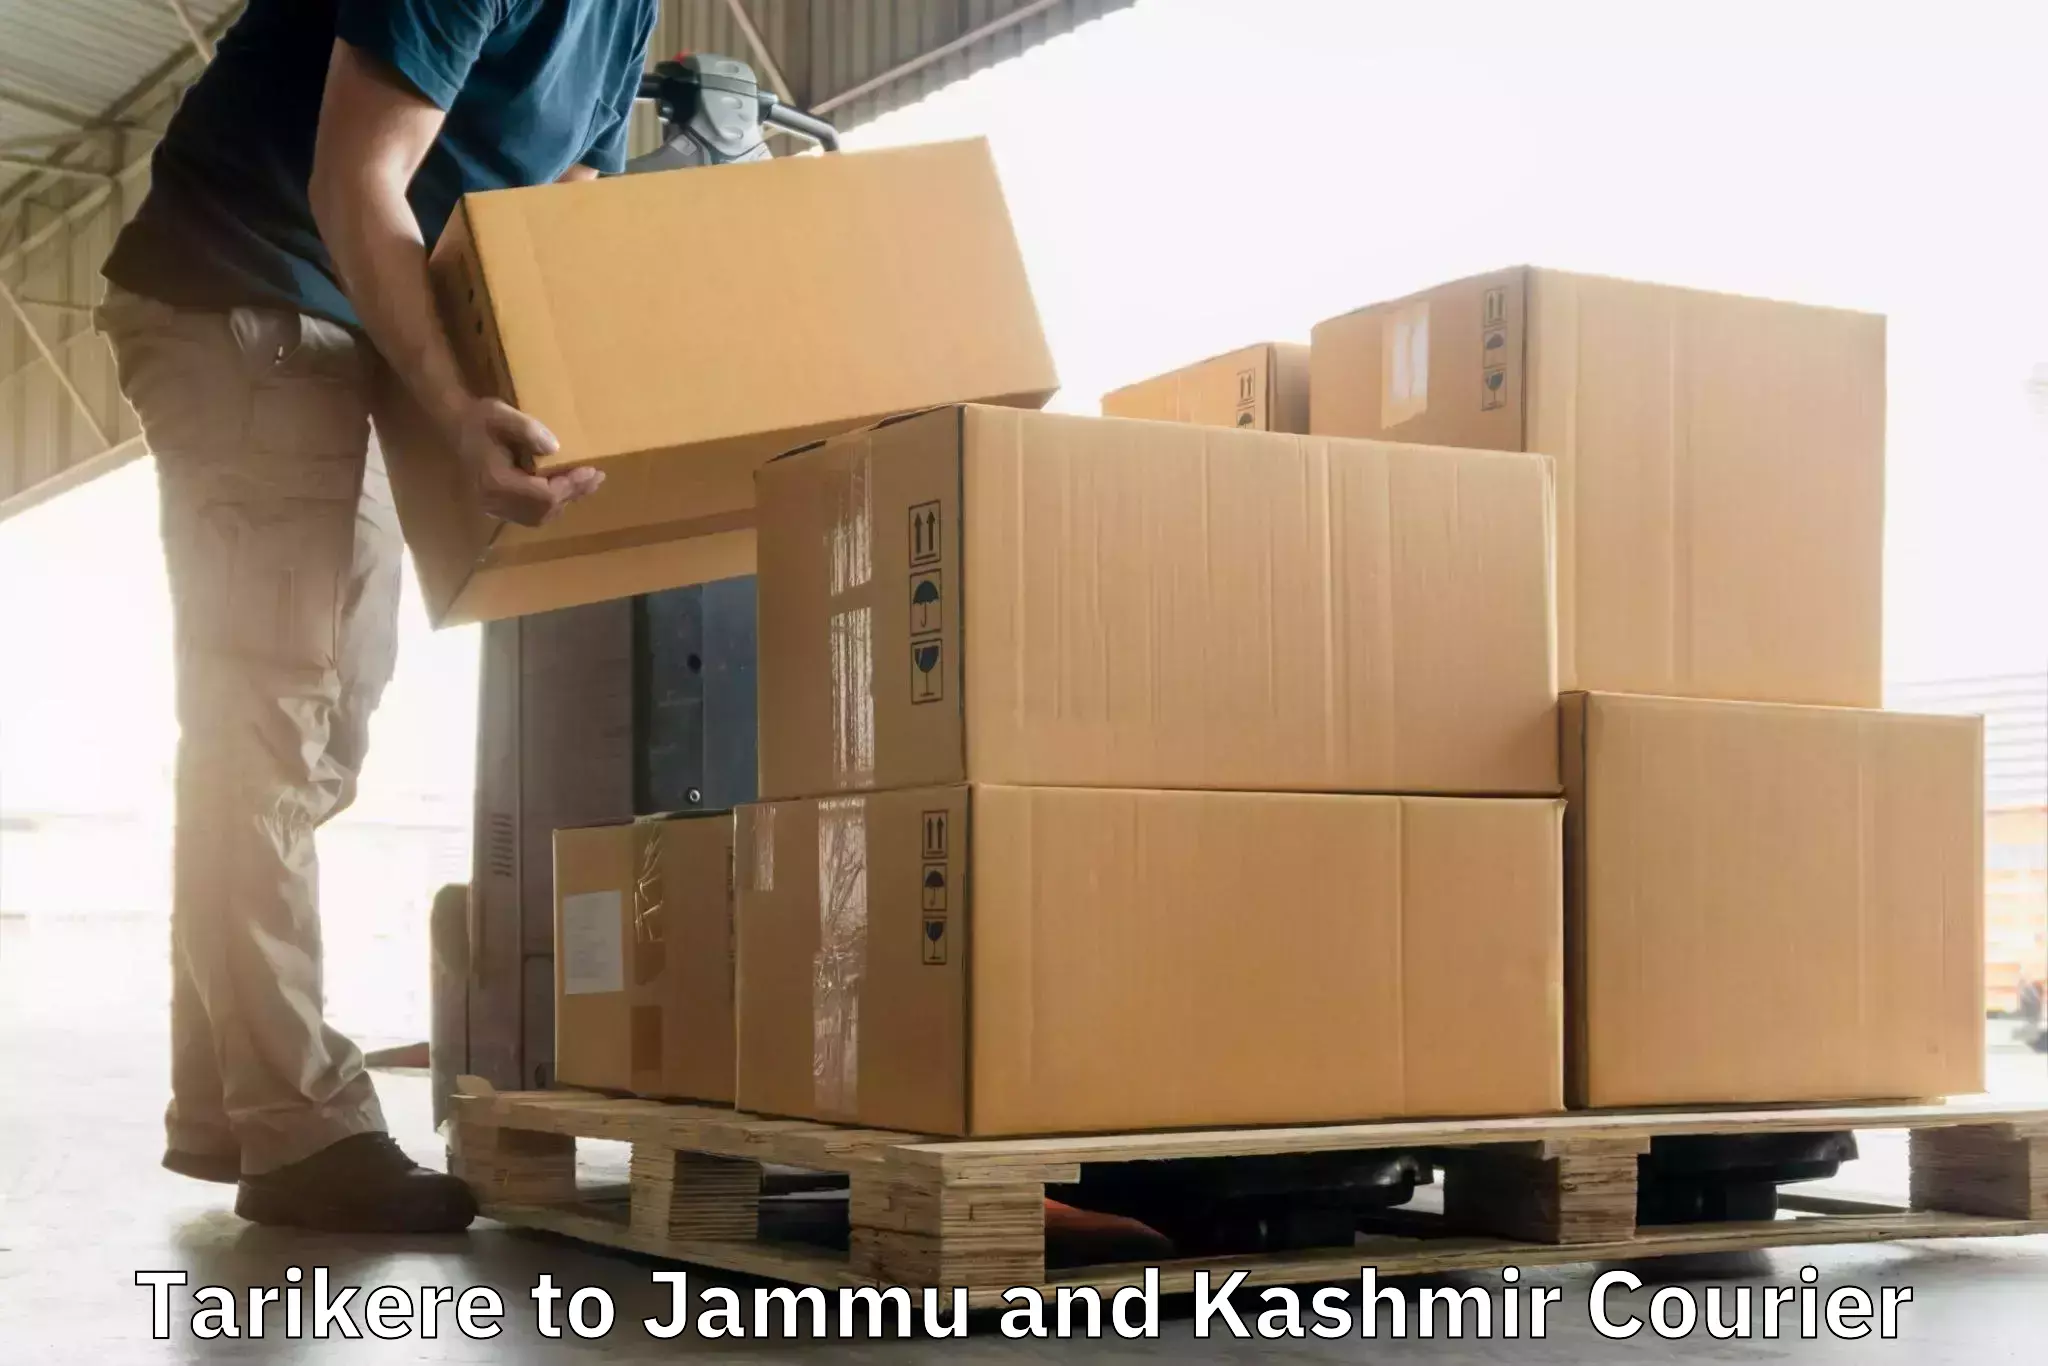 Automated parcel services Tarikere to Pulwama